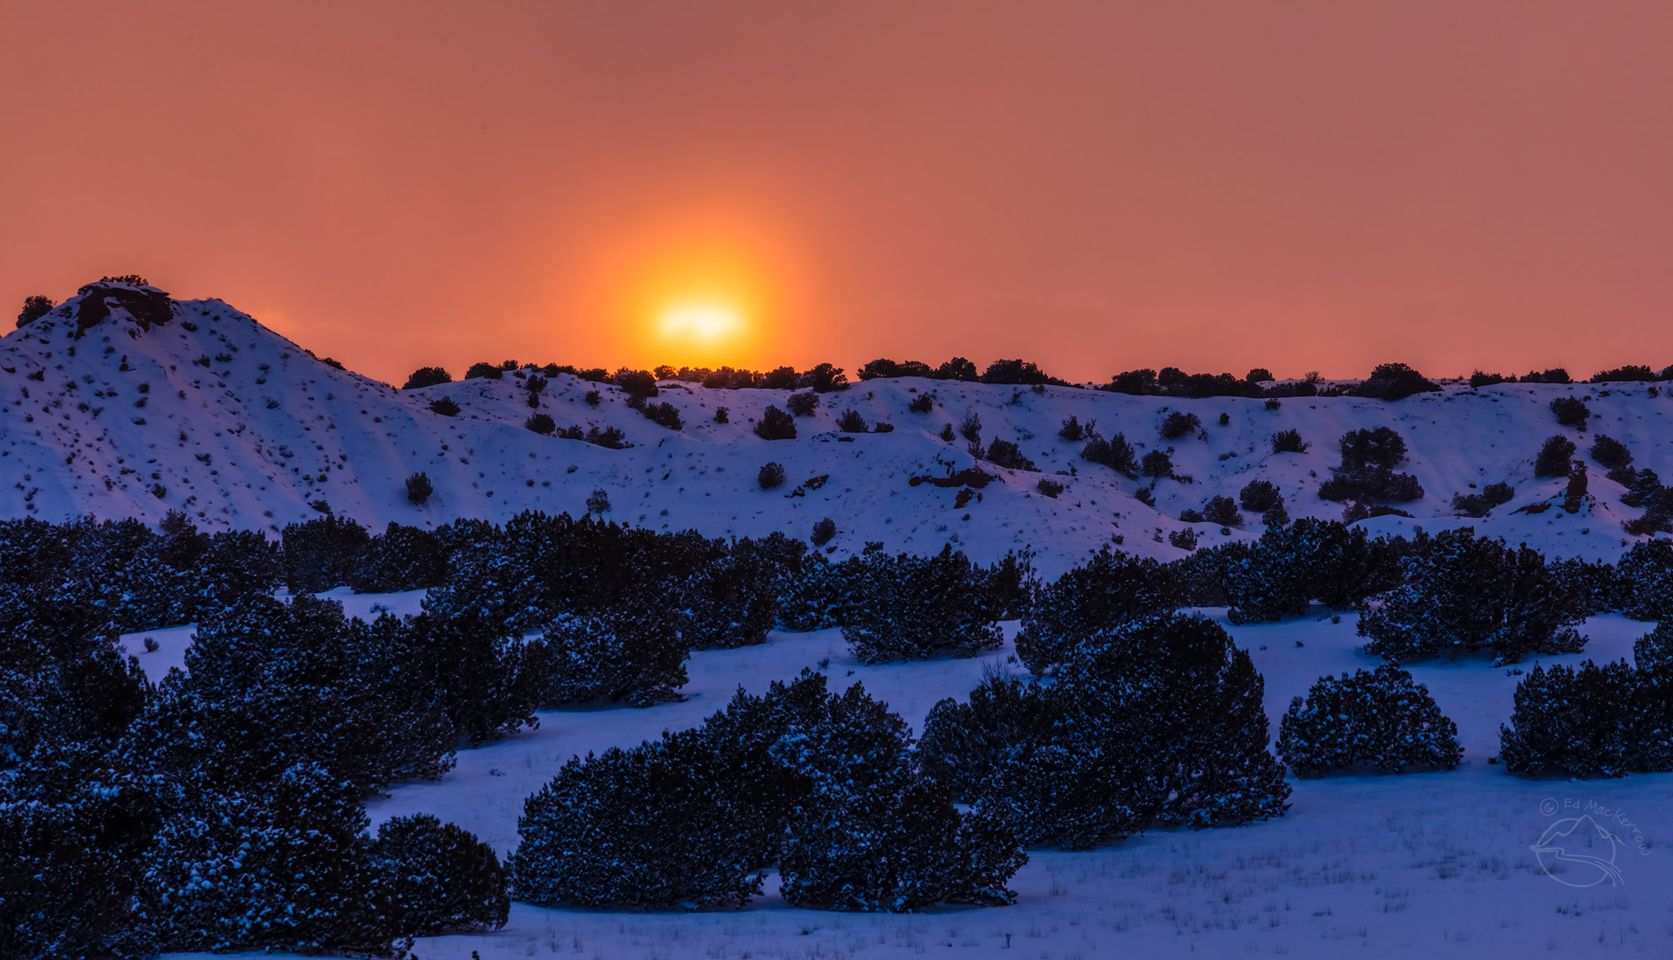 PHOTO: Cold and Snowy Sunset by Ed MacKerrow